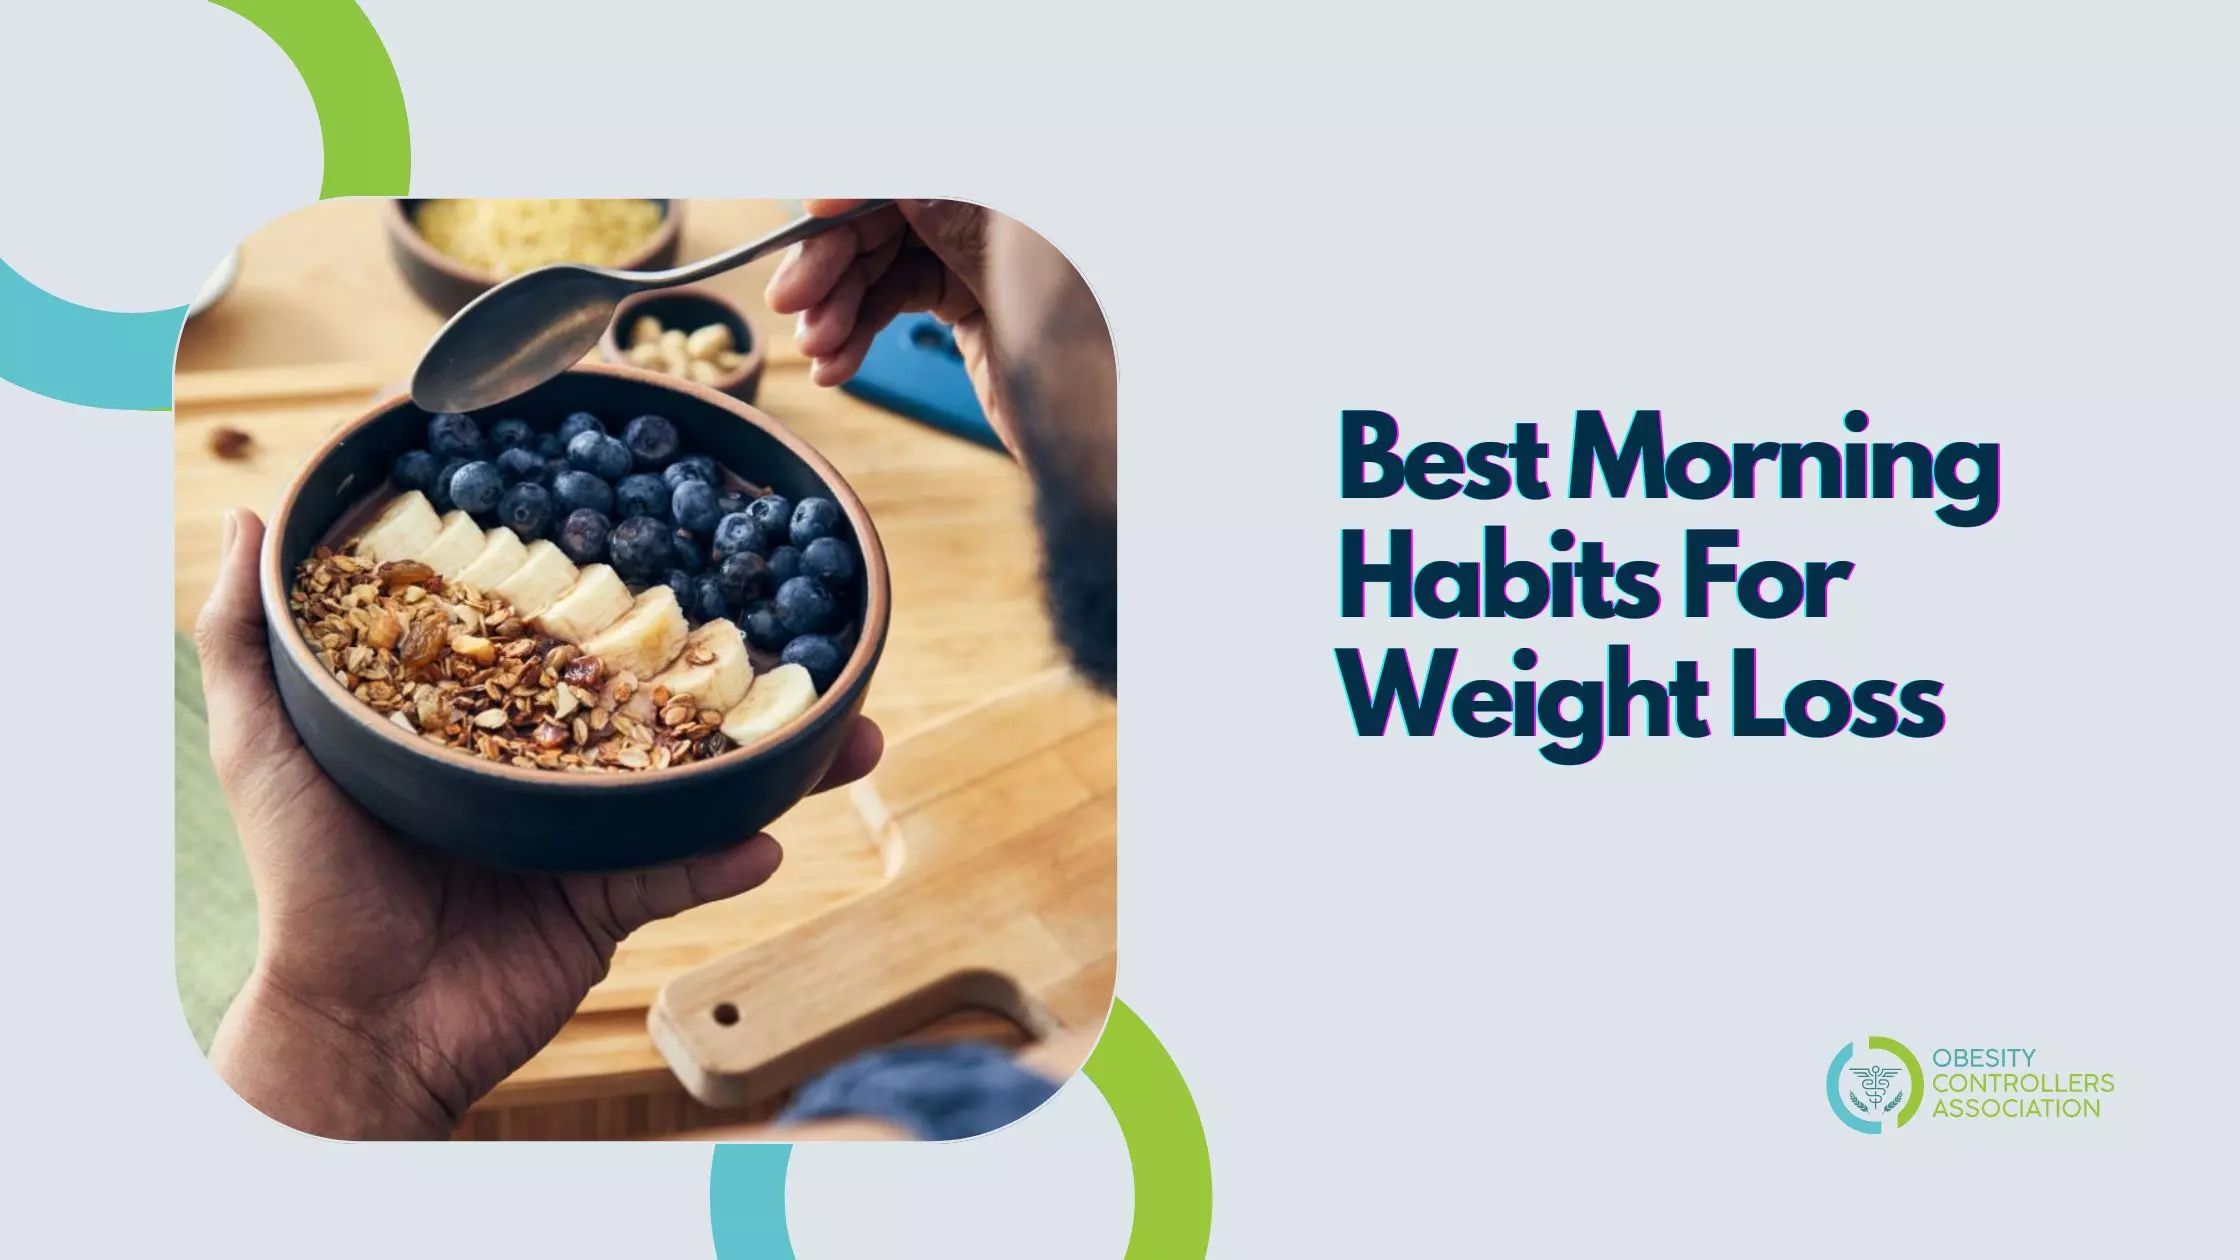 Best Morning Habits For Weight Loss